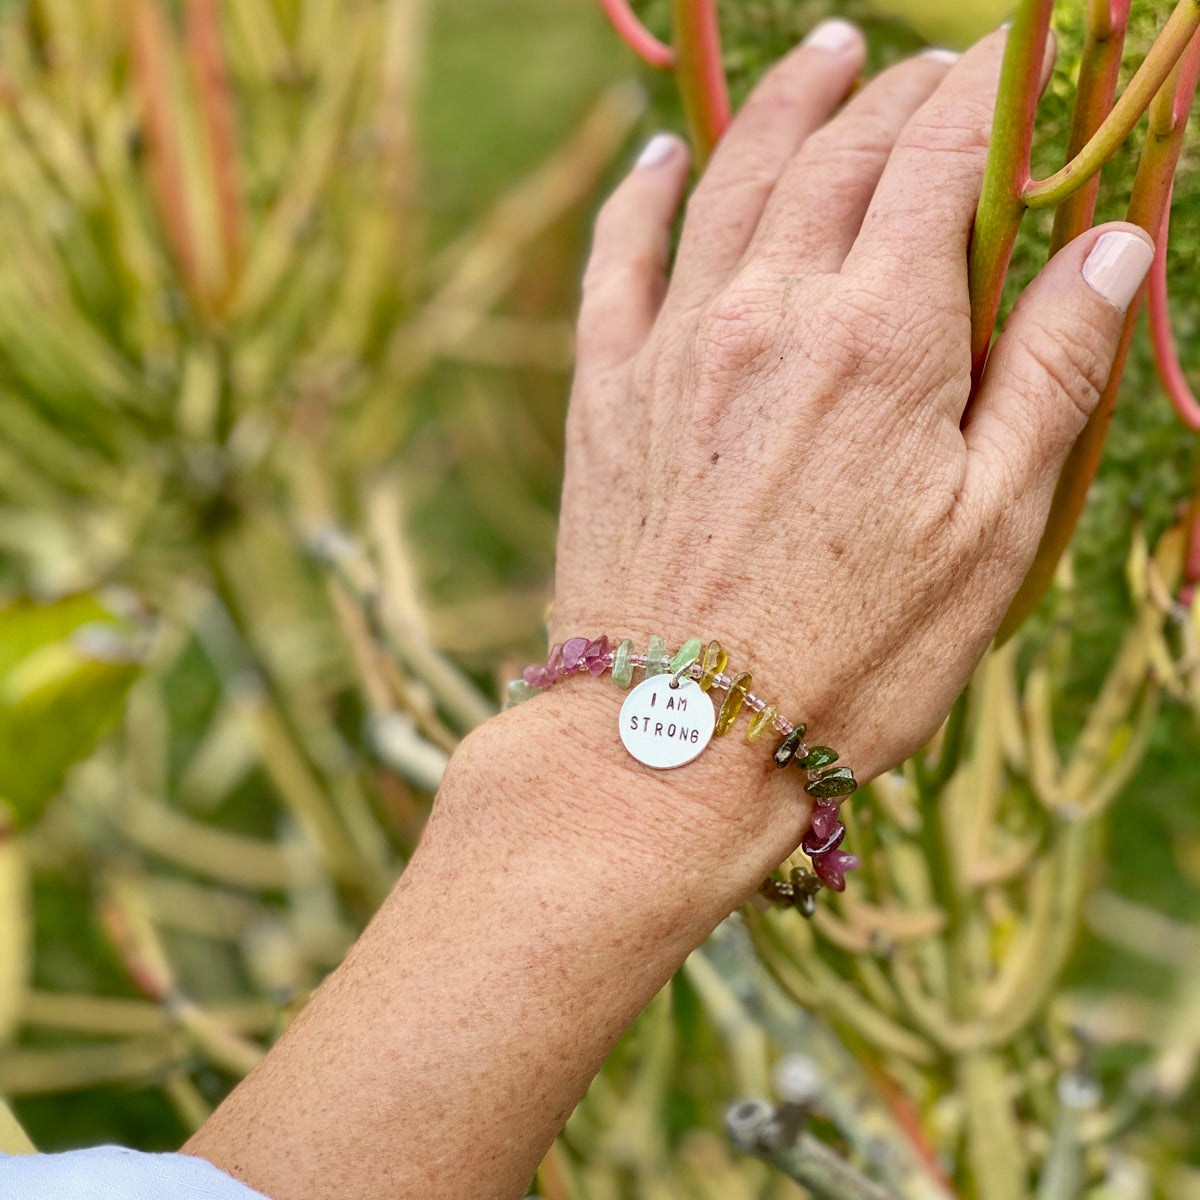 I am Strong Affirmation Bracelet with Tourmaline to Help Achieve Success. “I am” statements formulate, affirm, and perpetuate the stories you tell yourself. Stories about who you are, who you can be, and what you can do. Every “I am” is true, if you repeat it enough. 